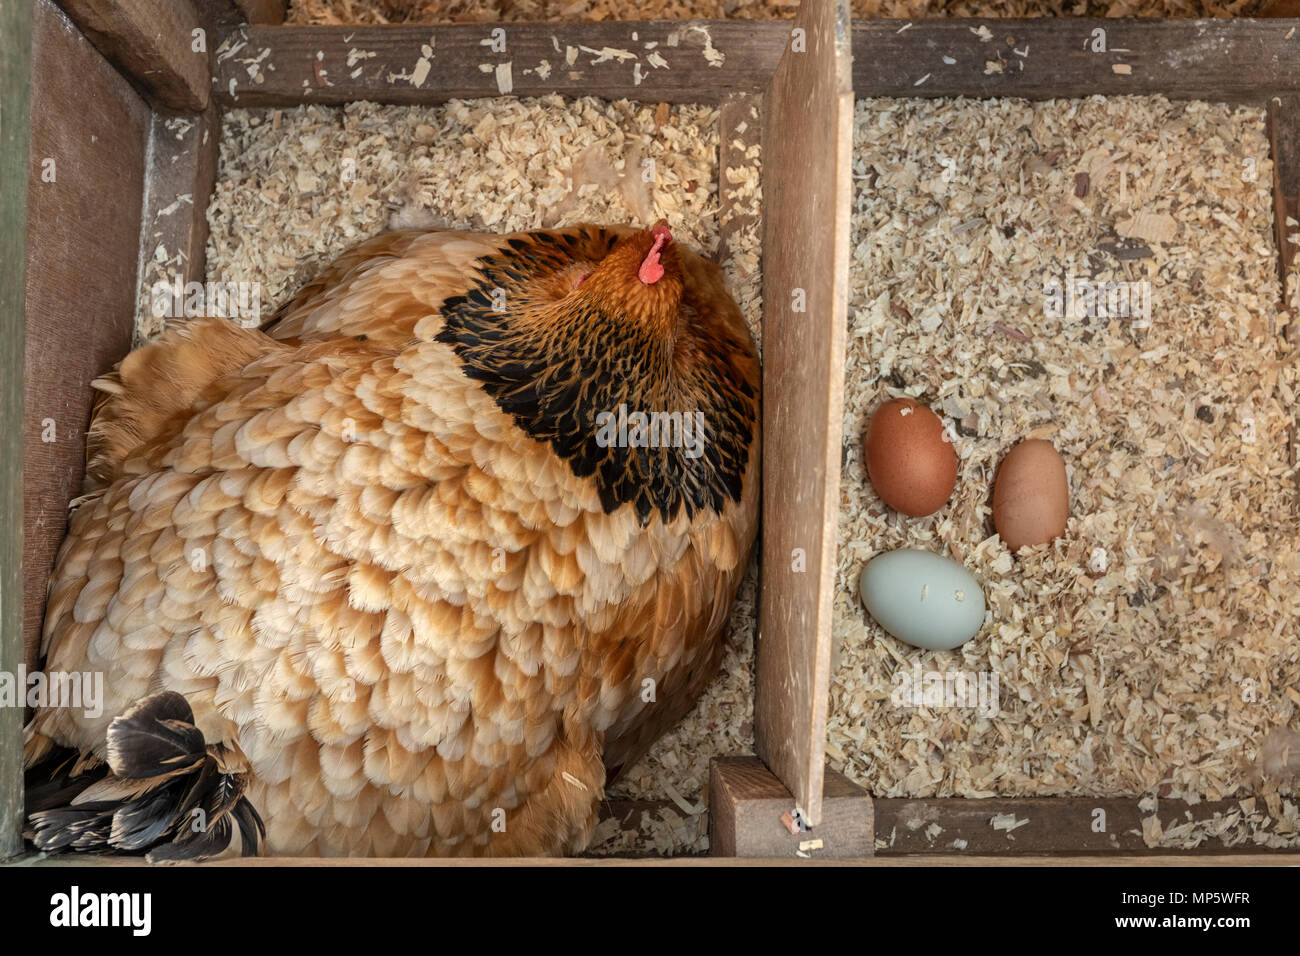 Sussex buff hen and assorted free range eggs Stock Photo - Alamy